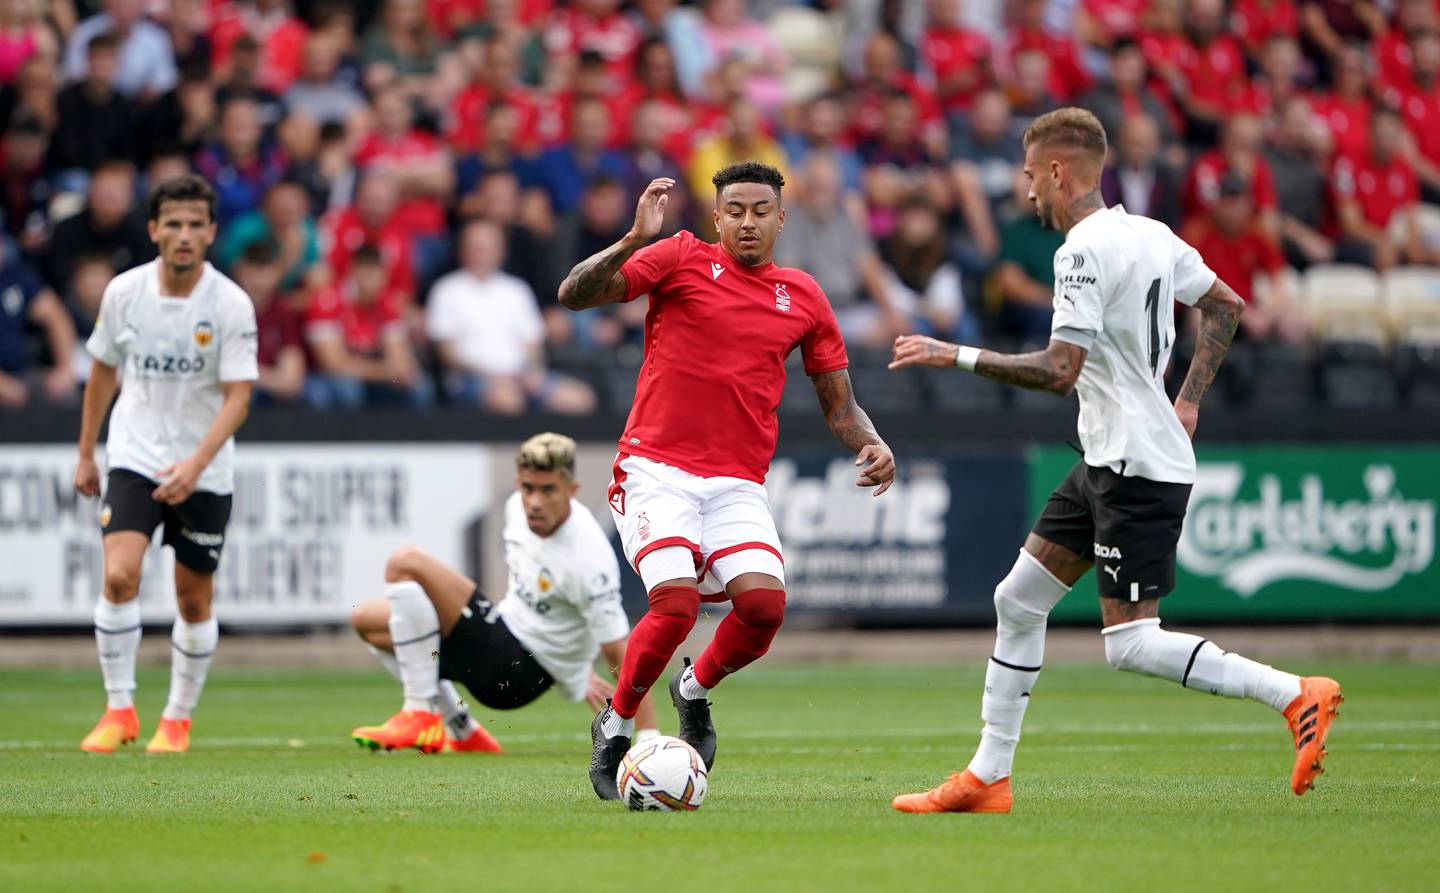 New signing Jesse Lingard will have an important role to play in Nottingham Forest's Premier League survival. PA